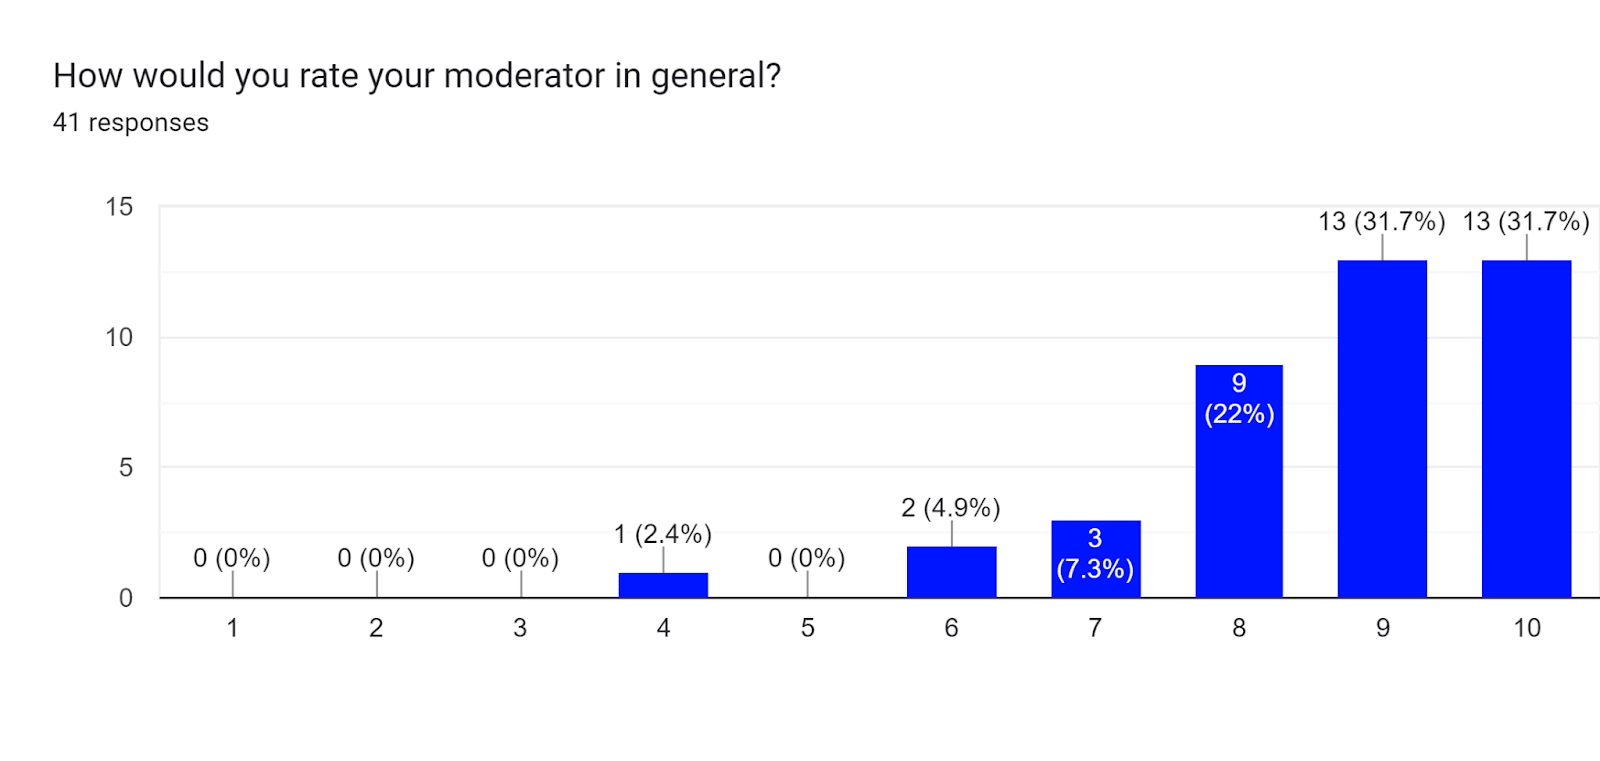 Forms response chart. Question title: How would you rate your moderator in general?. Number of responses: 41 responses.